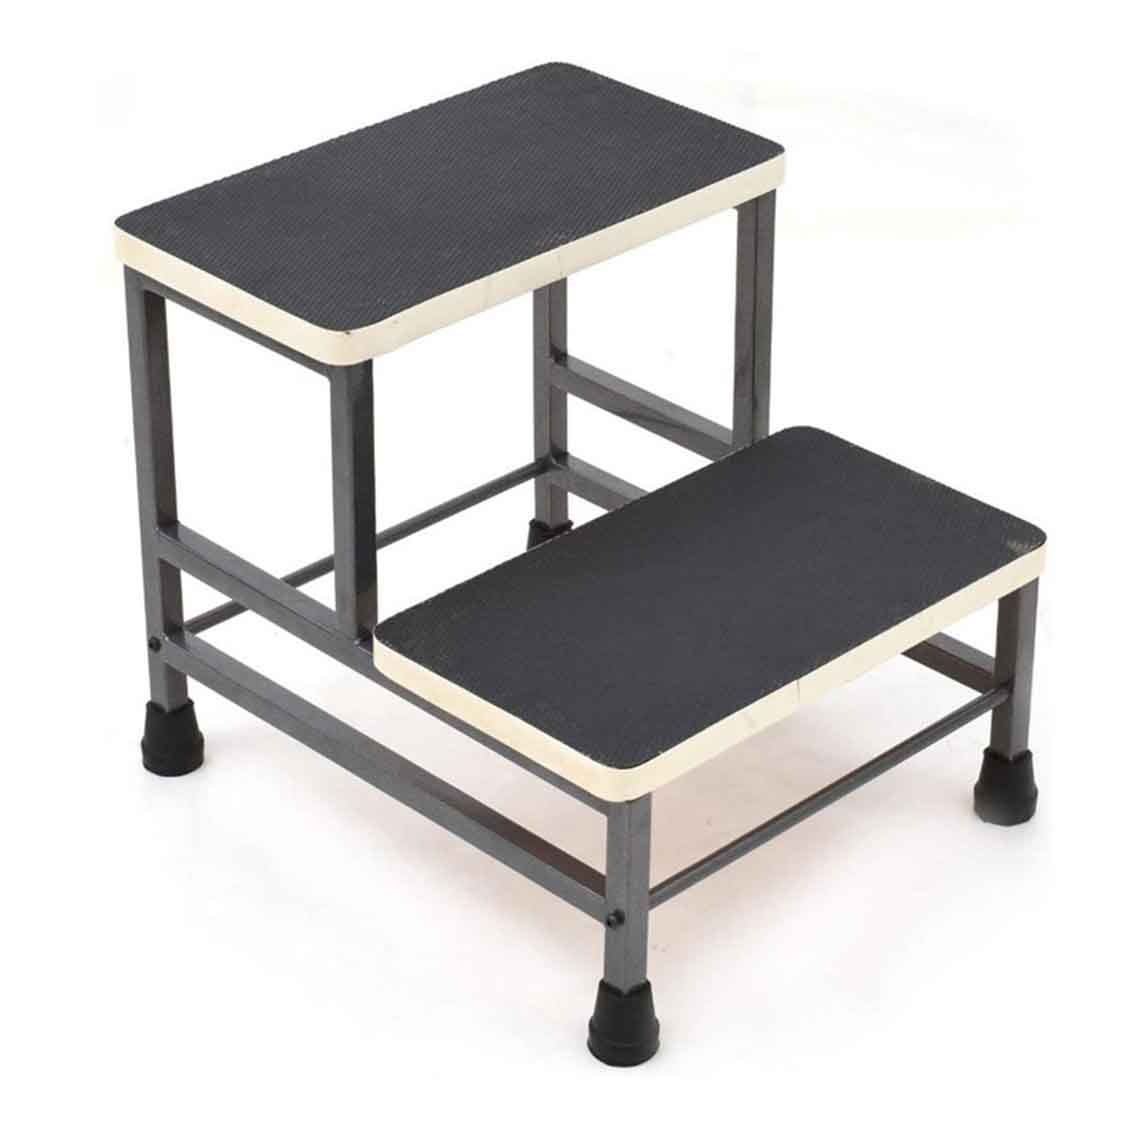 Double Step Stools